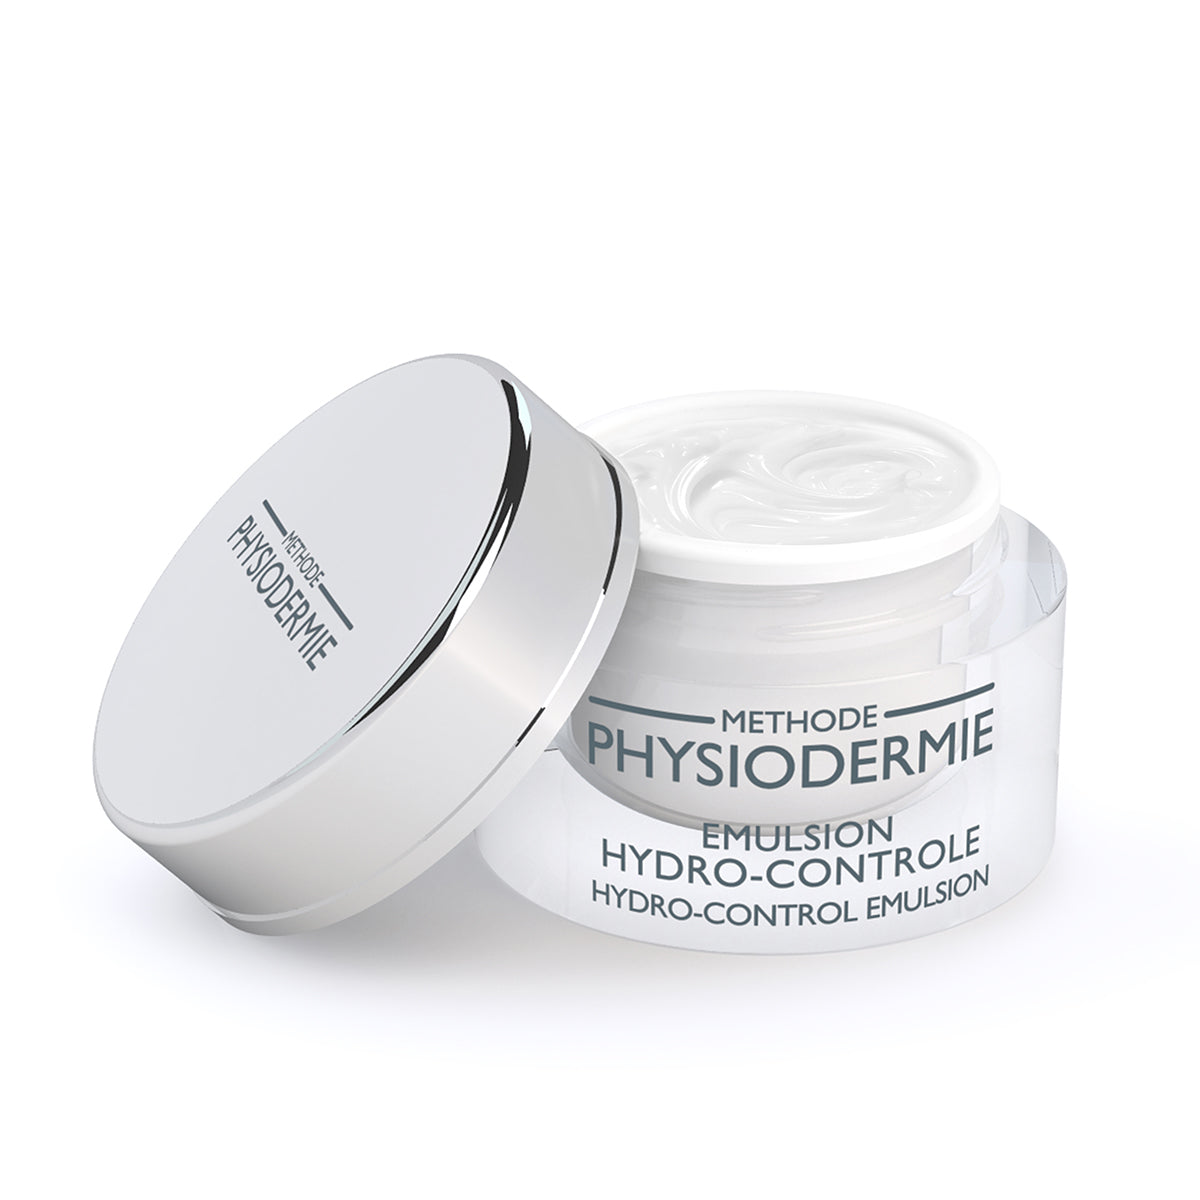 Physiodermie Hydro-Control Emulsion  - Accent on Beauty 